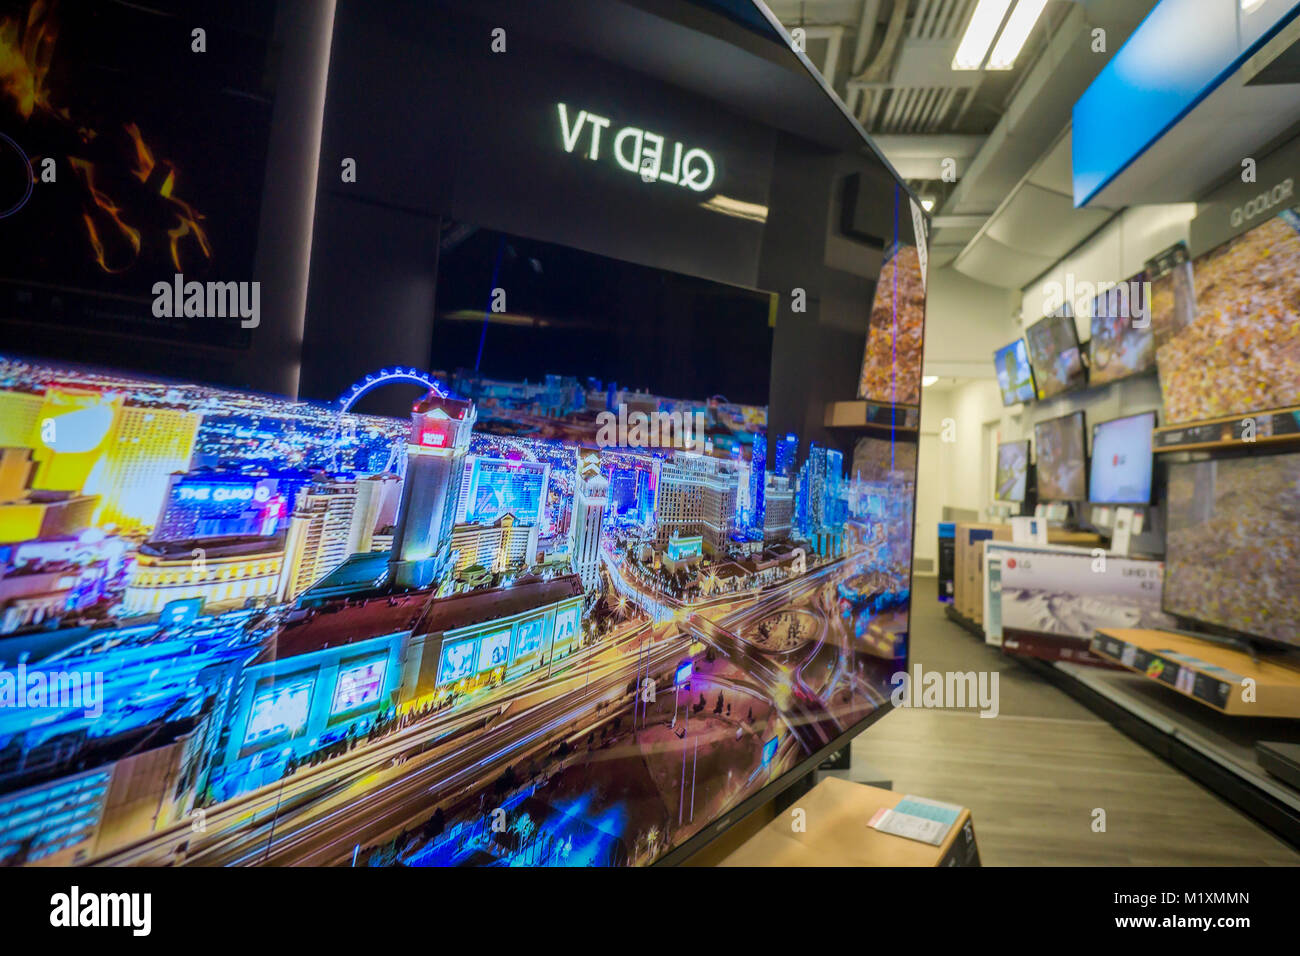 Samsung QLED TV brand 4K Ultra High Definition televisions in a Best Buy electronics store in New York on Friday, January 26, 2018. (Â© Richard B. Levine) Stock Photo